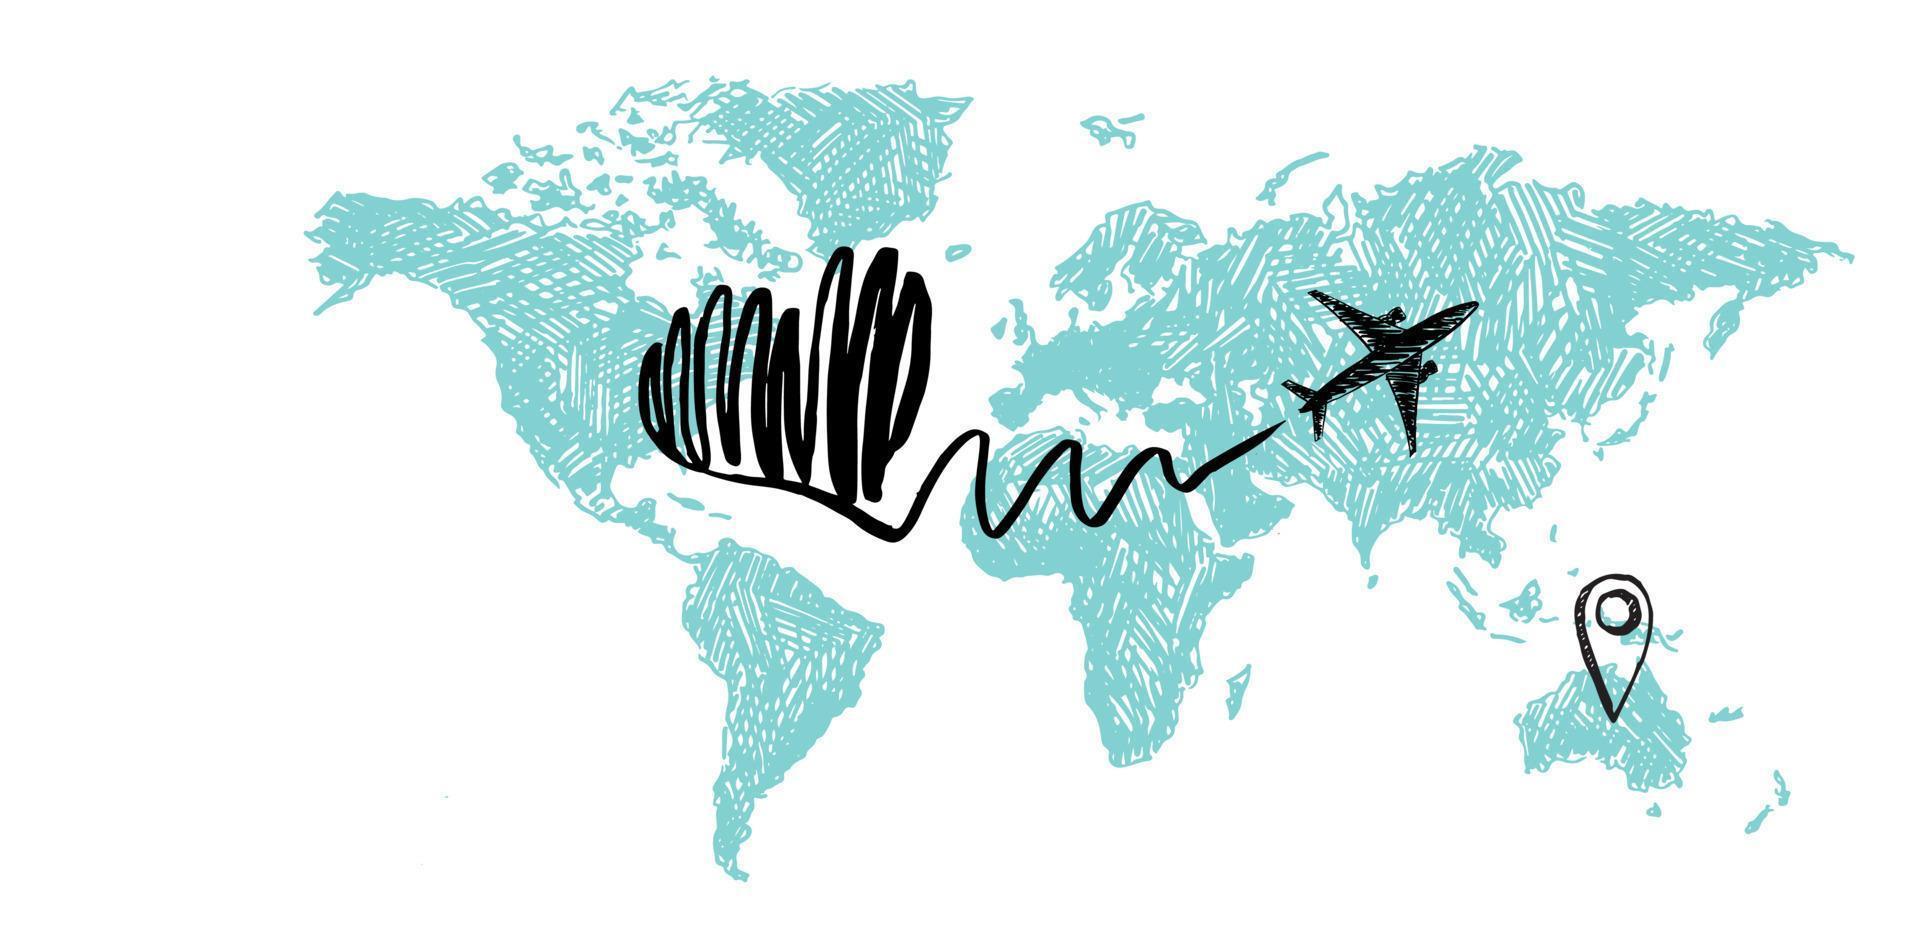 Map of the world, The plane drew a heart. Grunge style, vector illustrations.